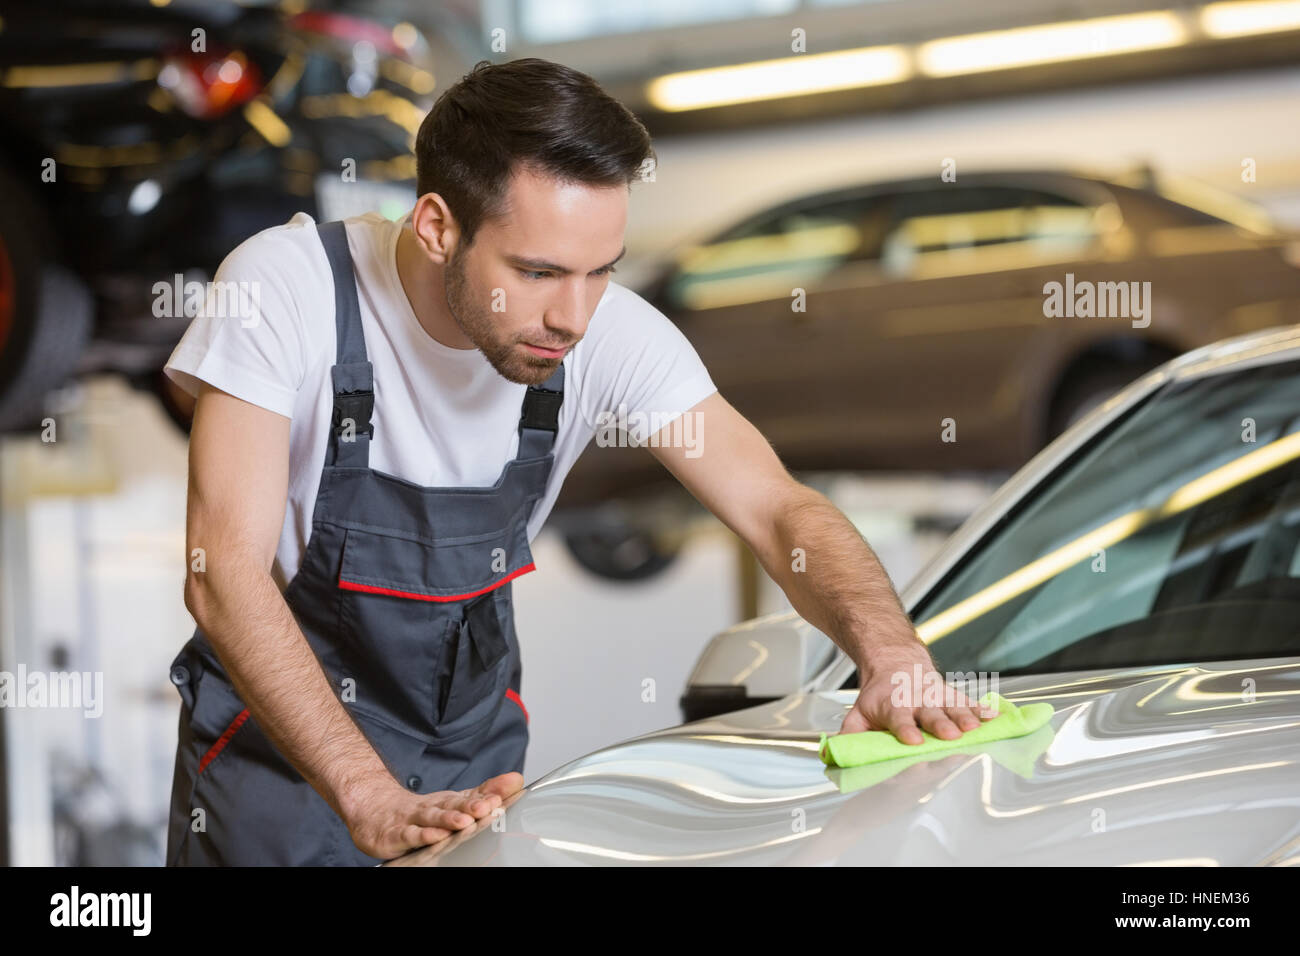 Young automobile mechanic cleaning car in repair shop Stock Photo